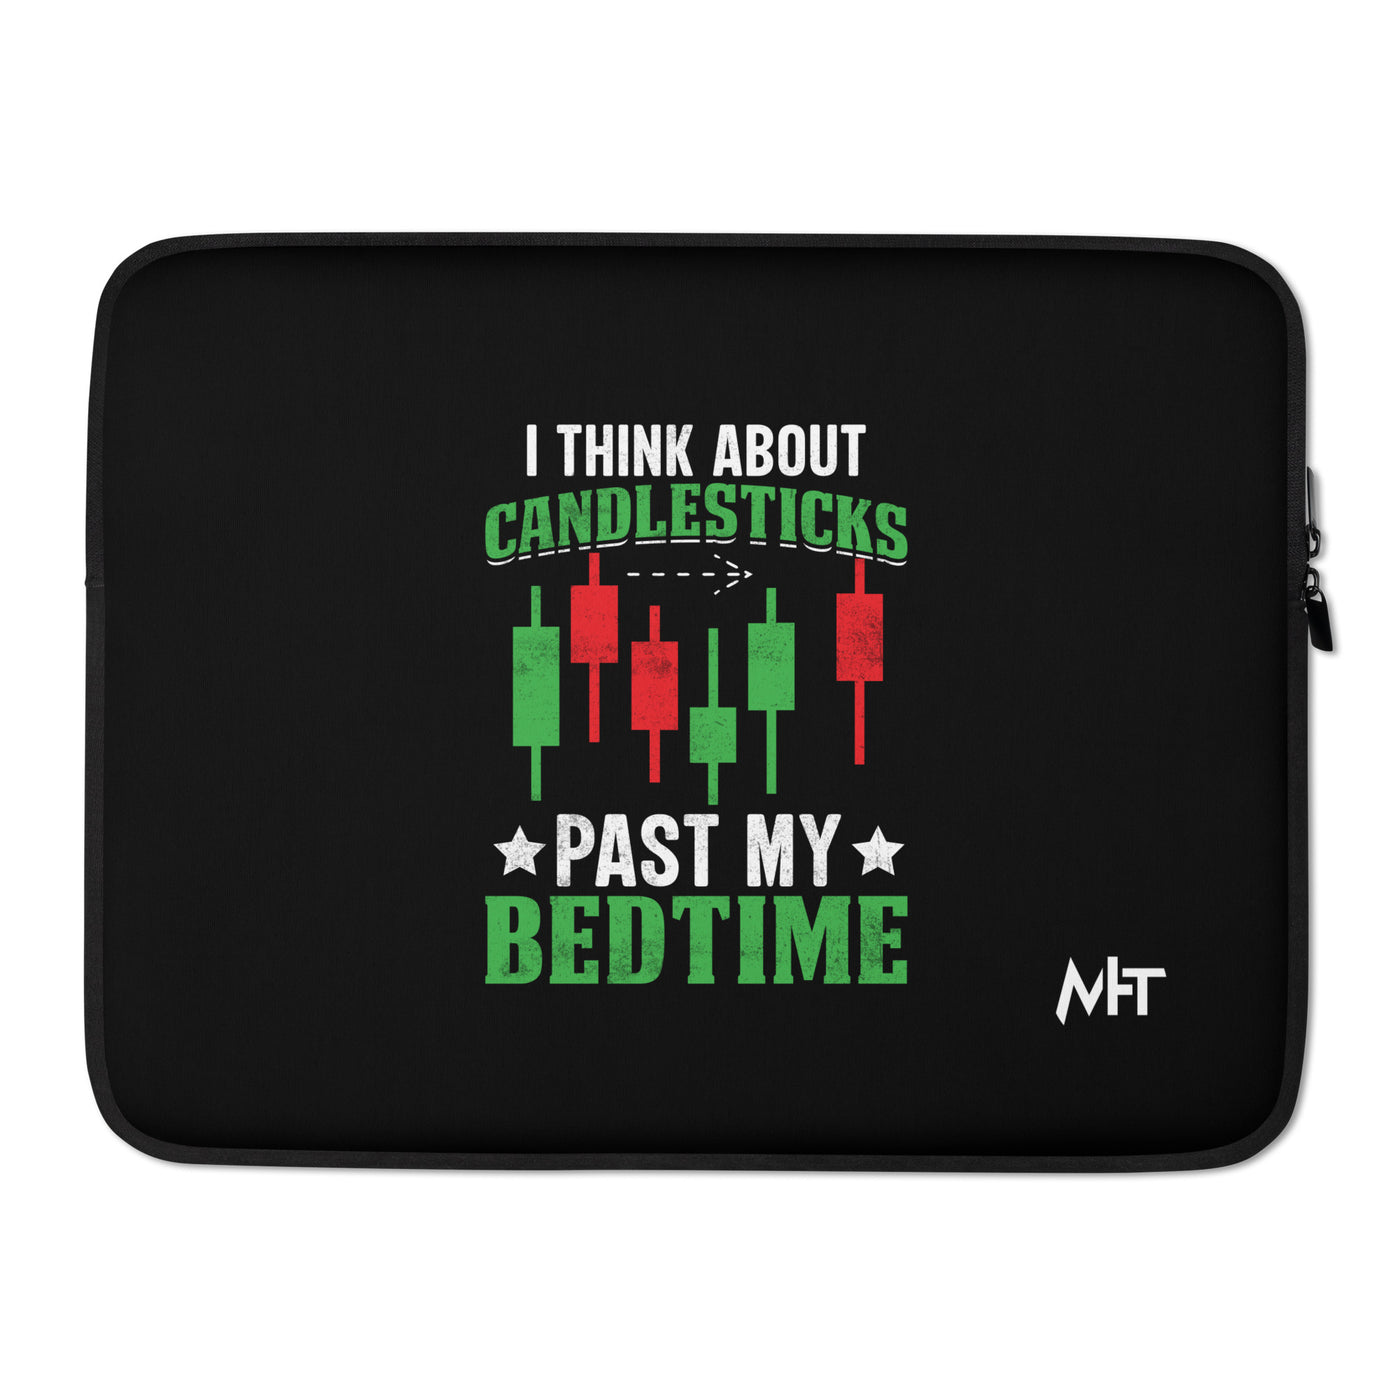 I Think about Candlesticks past my bedtime - Laptop Sleeve